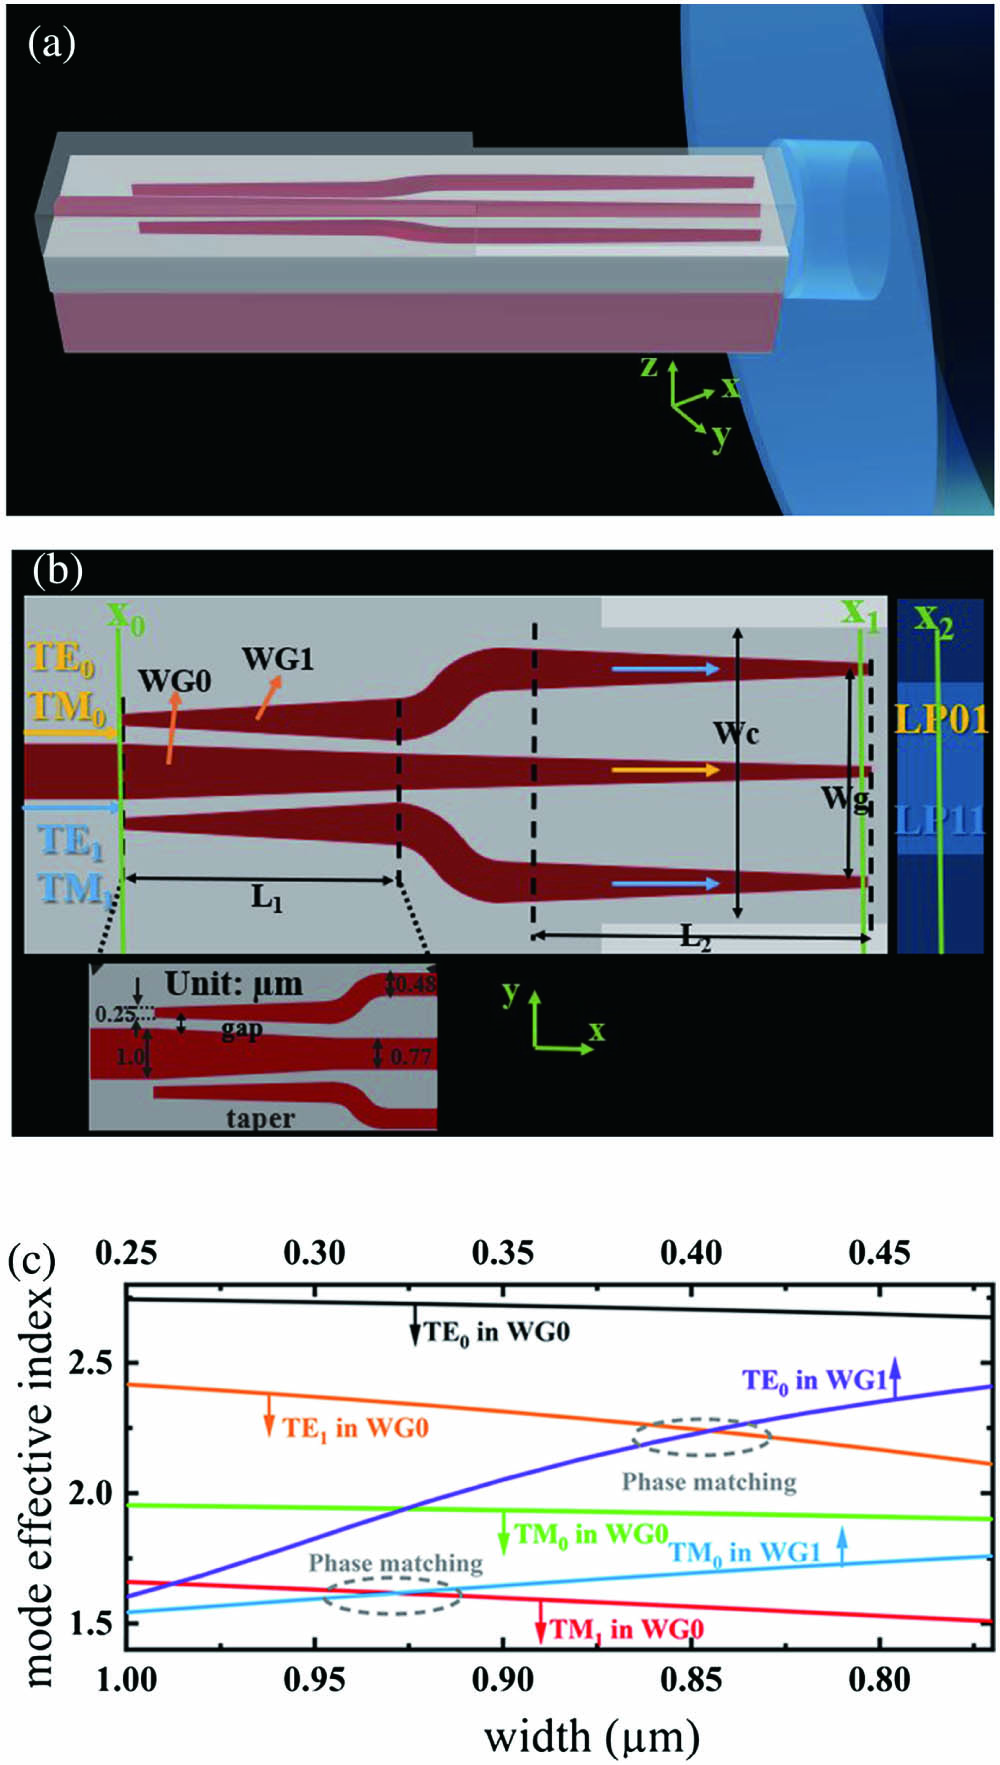 Schematics of DMEC coupling with dual-mode fiber in (a) 3D view and (b) top view; the silicon waveguides are in red, and the silicon oxide layer is in gray. The modes conversion process is also demonstrated. (c) Effective refractive index of the modes in each waveguide (WG0/WG1) of the mode-evolution counter-taper with tapering width from 1 µm/0.25 µm to 0.77 µm/0.48 µm.